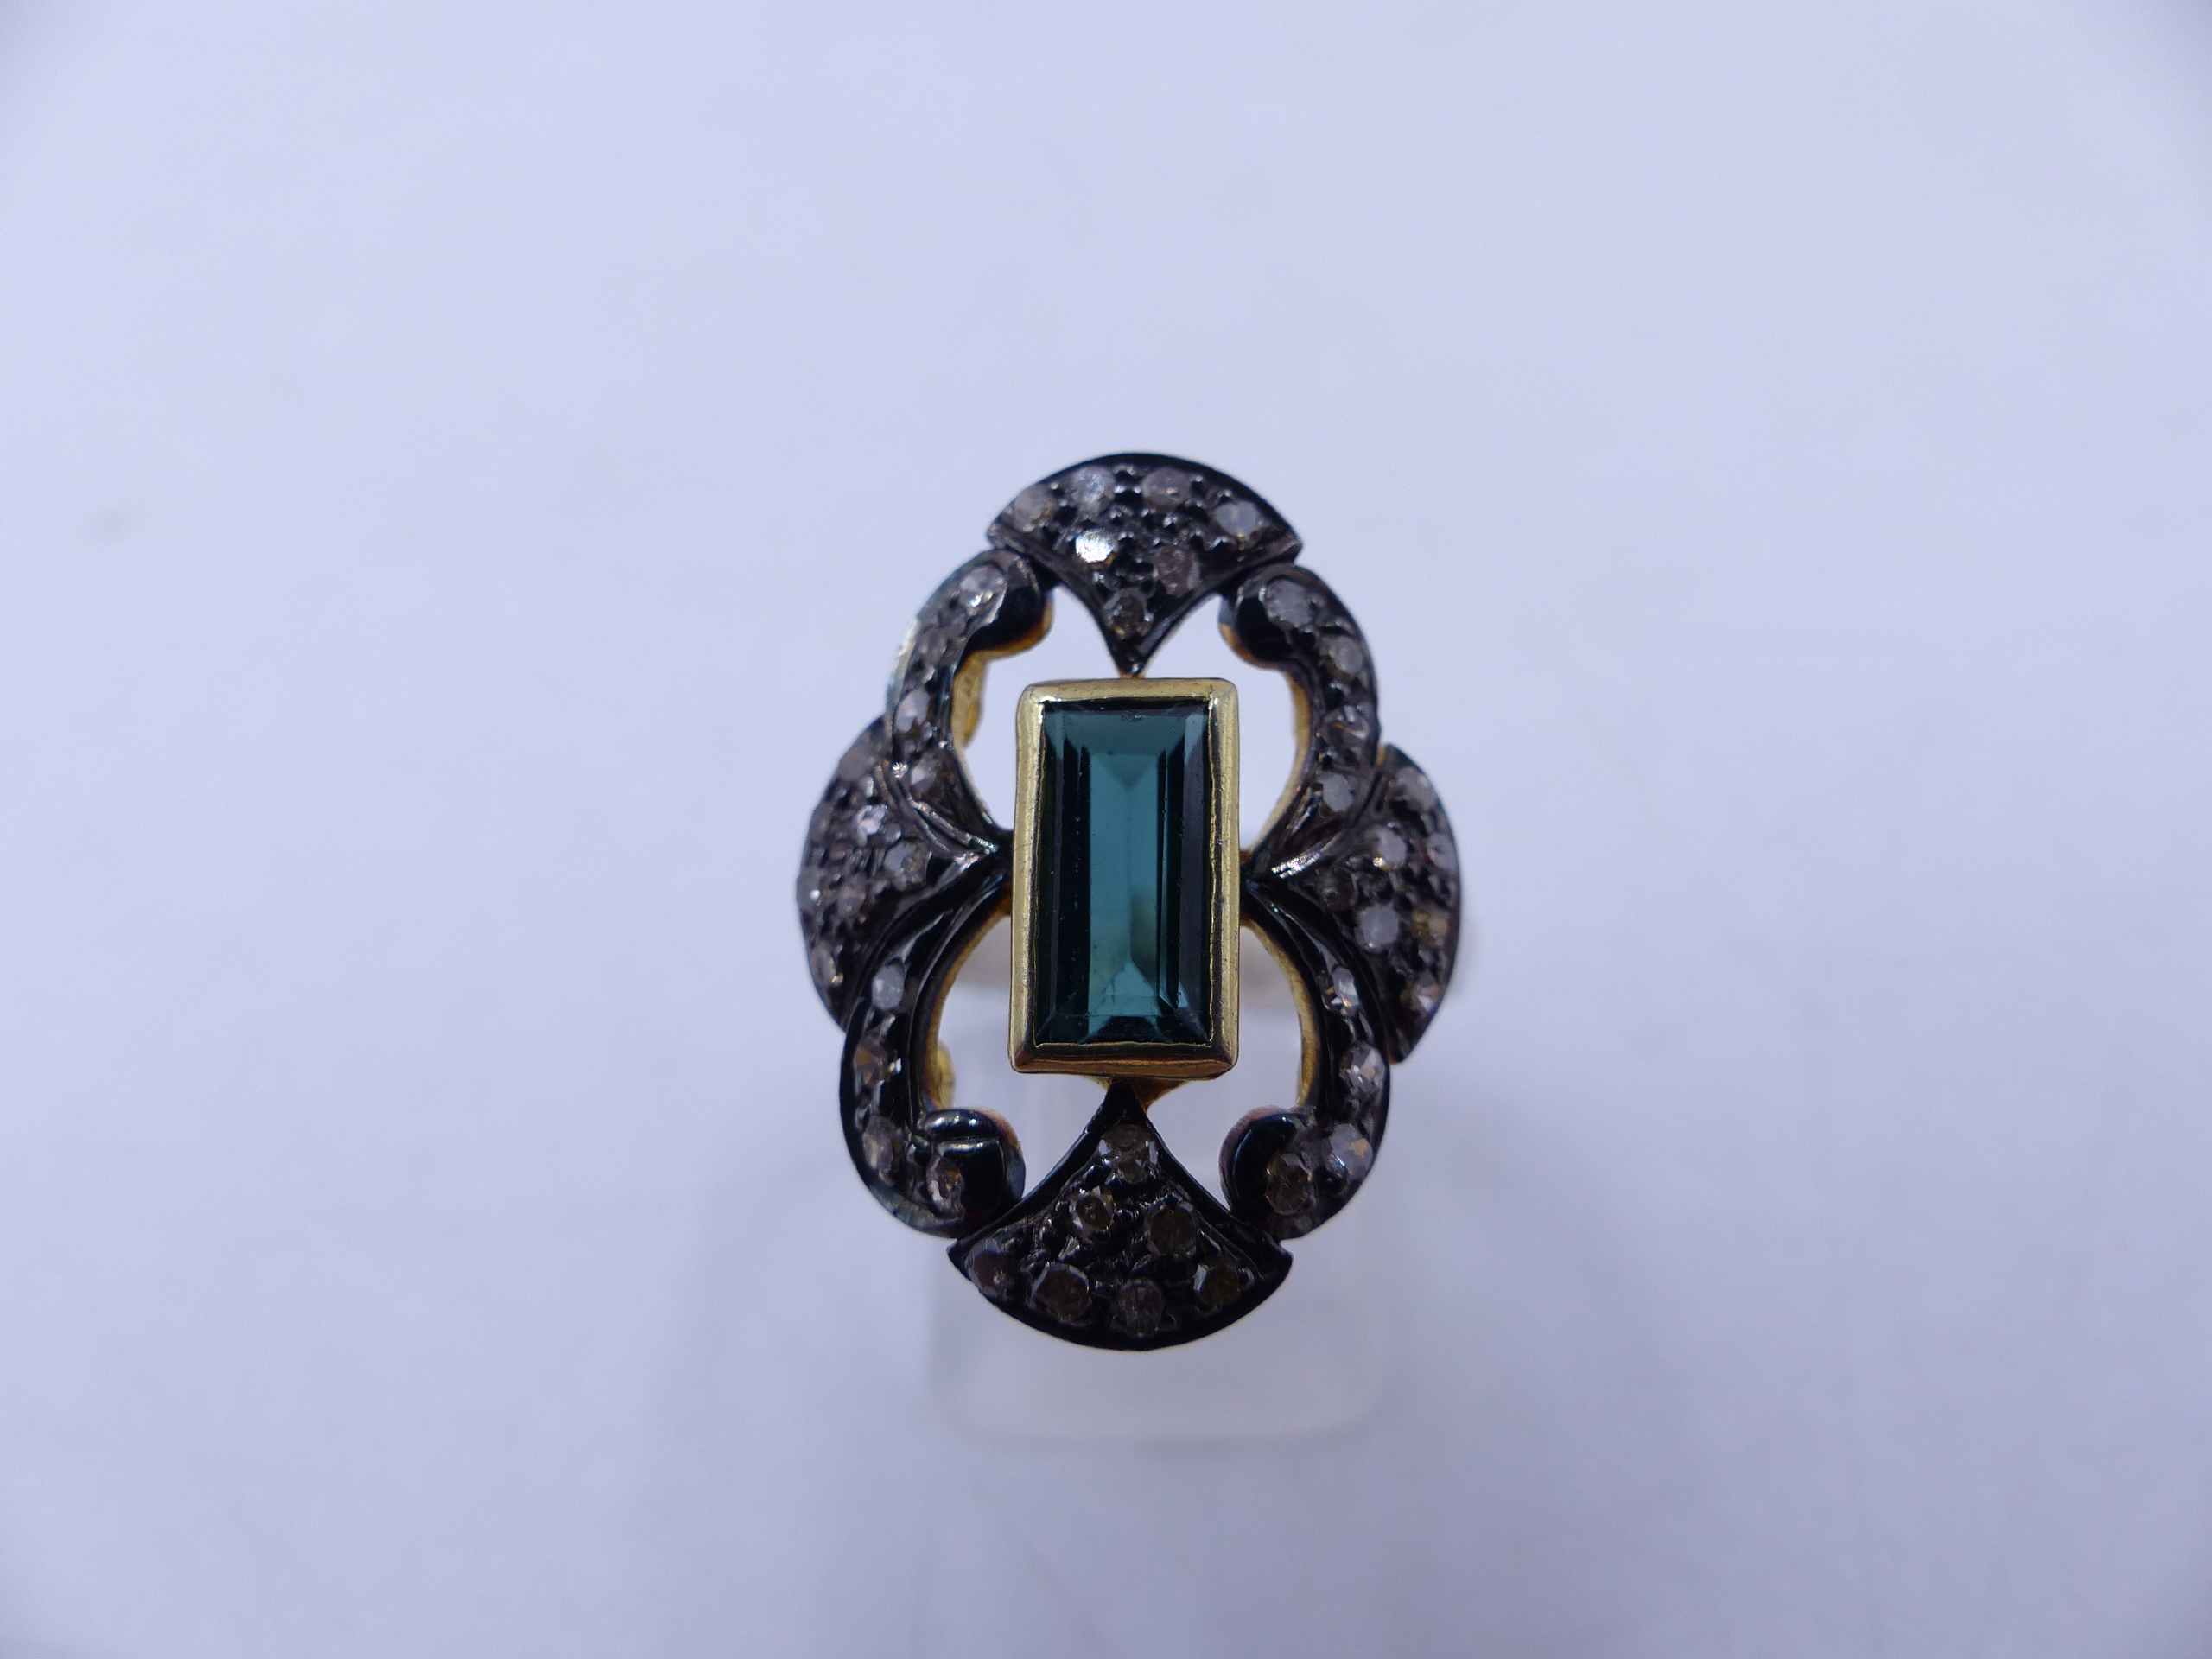 A GREEN TOURMALINE AND FILIGREE SET DIAMOND RING. THE CENTRAL GREEN TOURMALINE IS AN ELONGATED